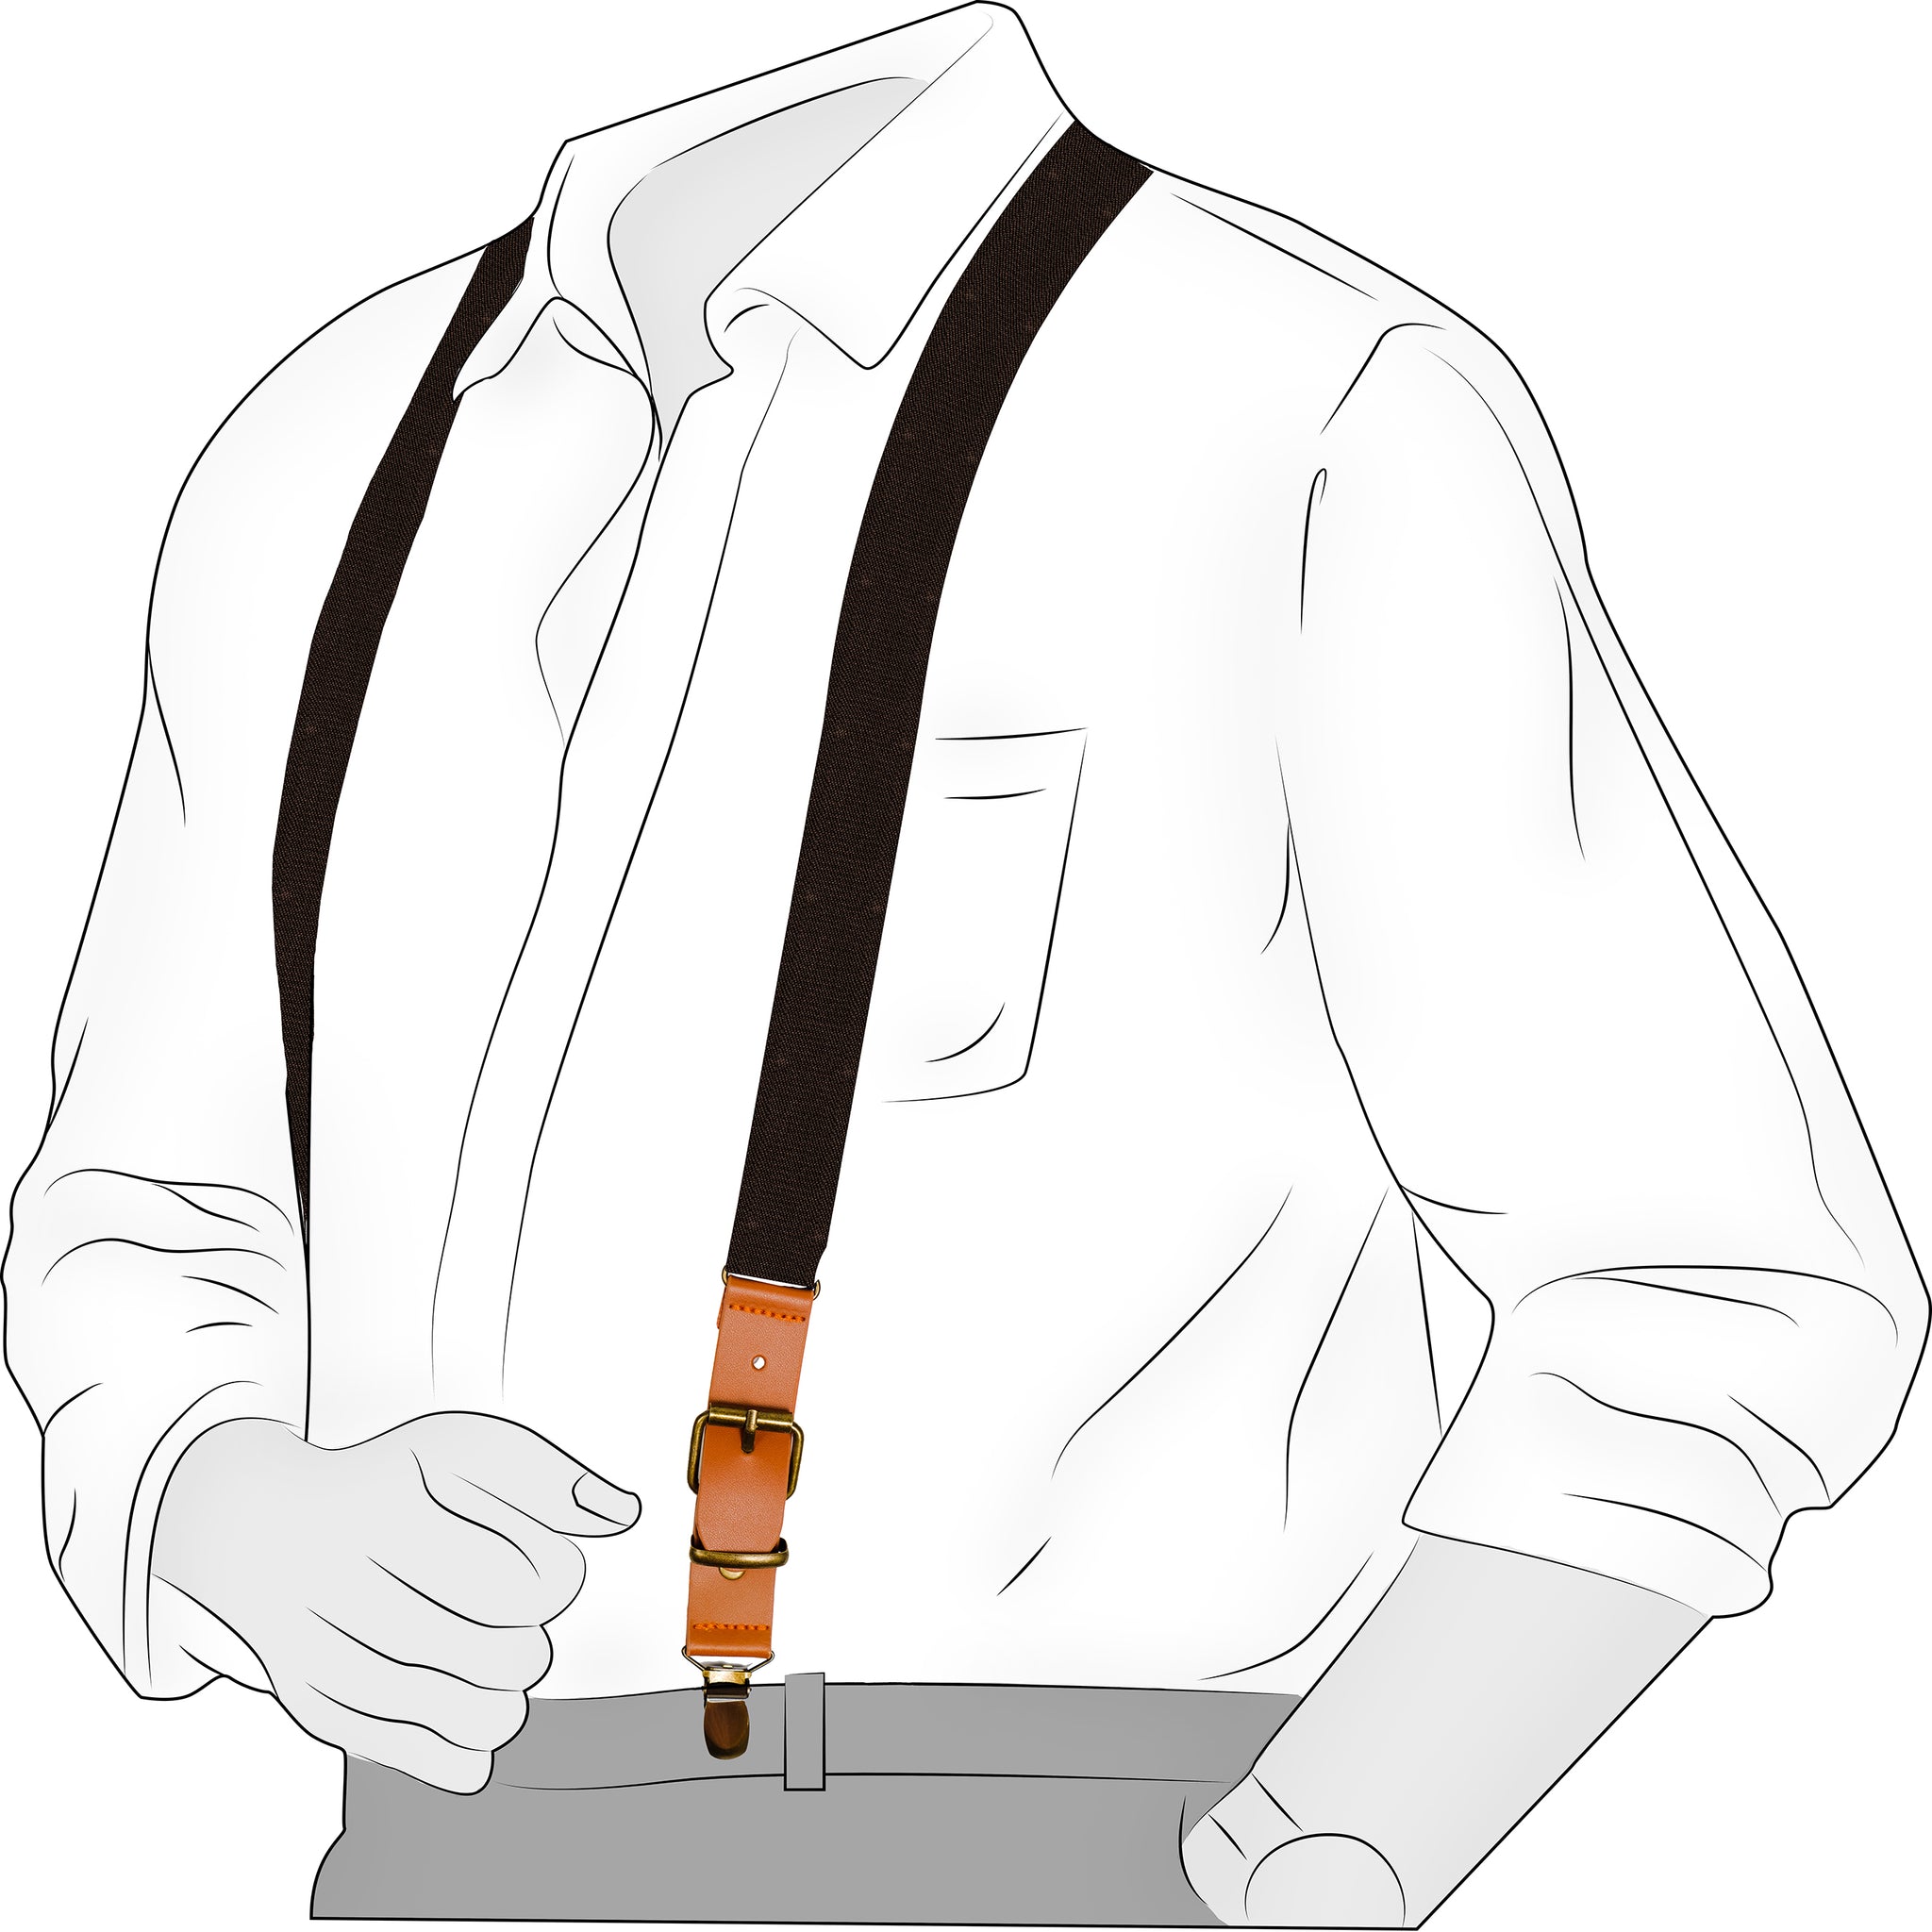 Chokore Y-shaped Suspenders with Leather detailing and adjustable Elastic Strap (Chocolate Brown)